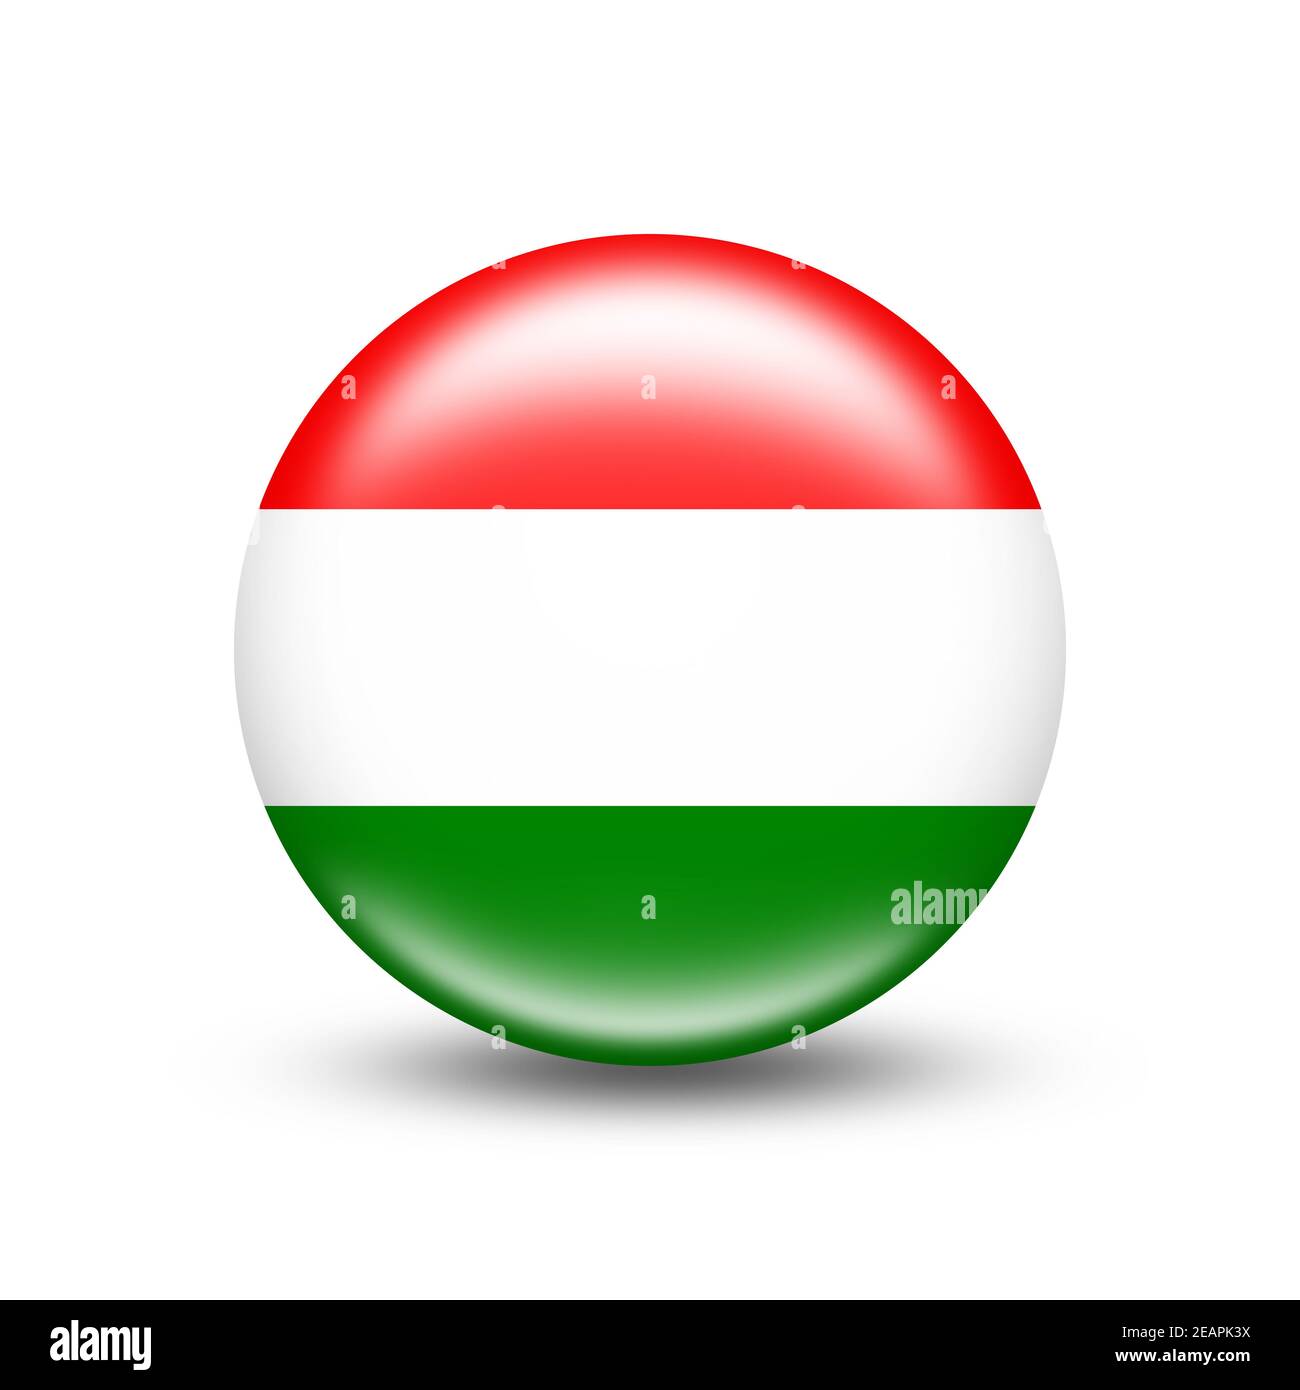 Hungary country flag in a circle with white shadow Stock Photo